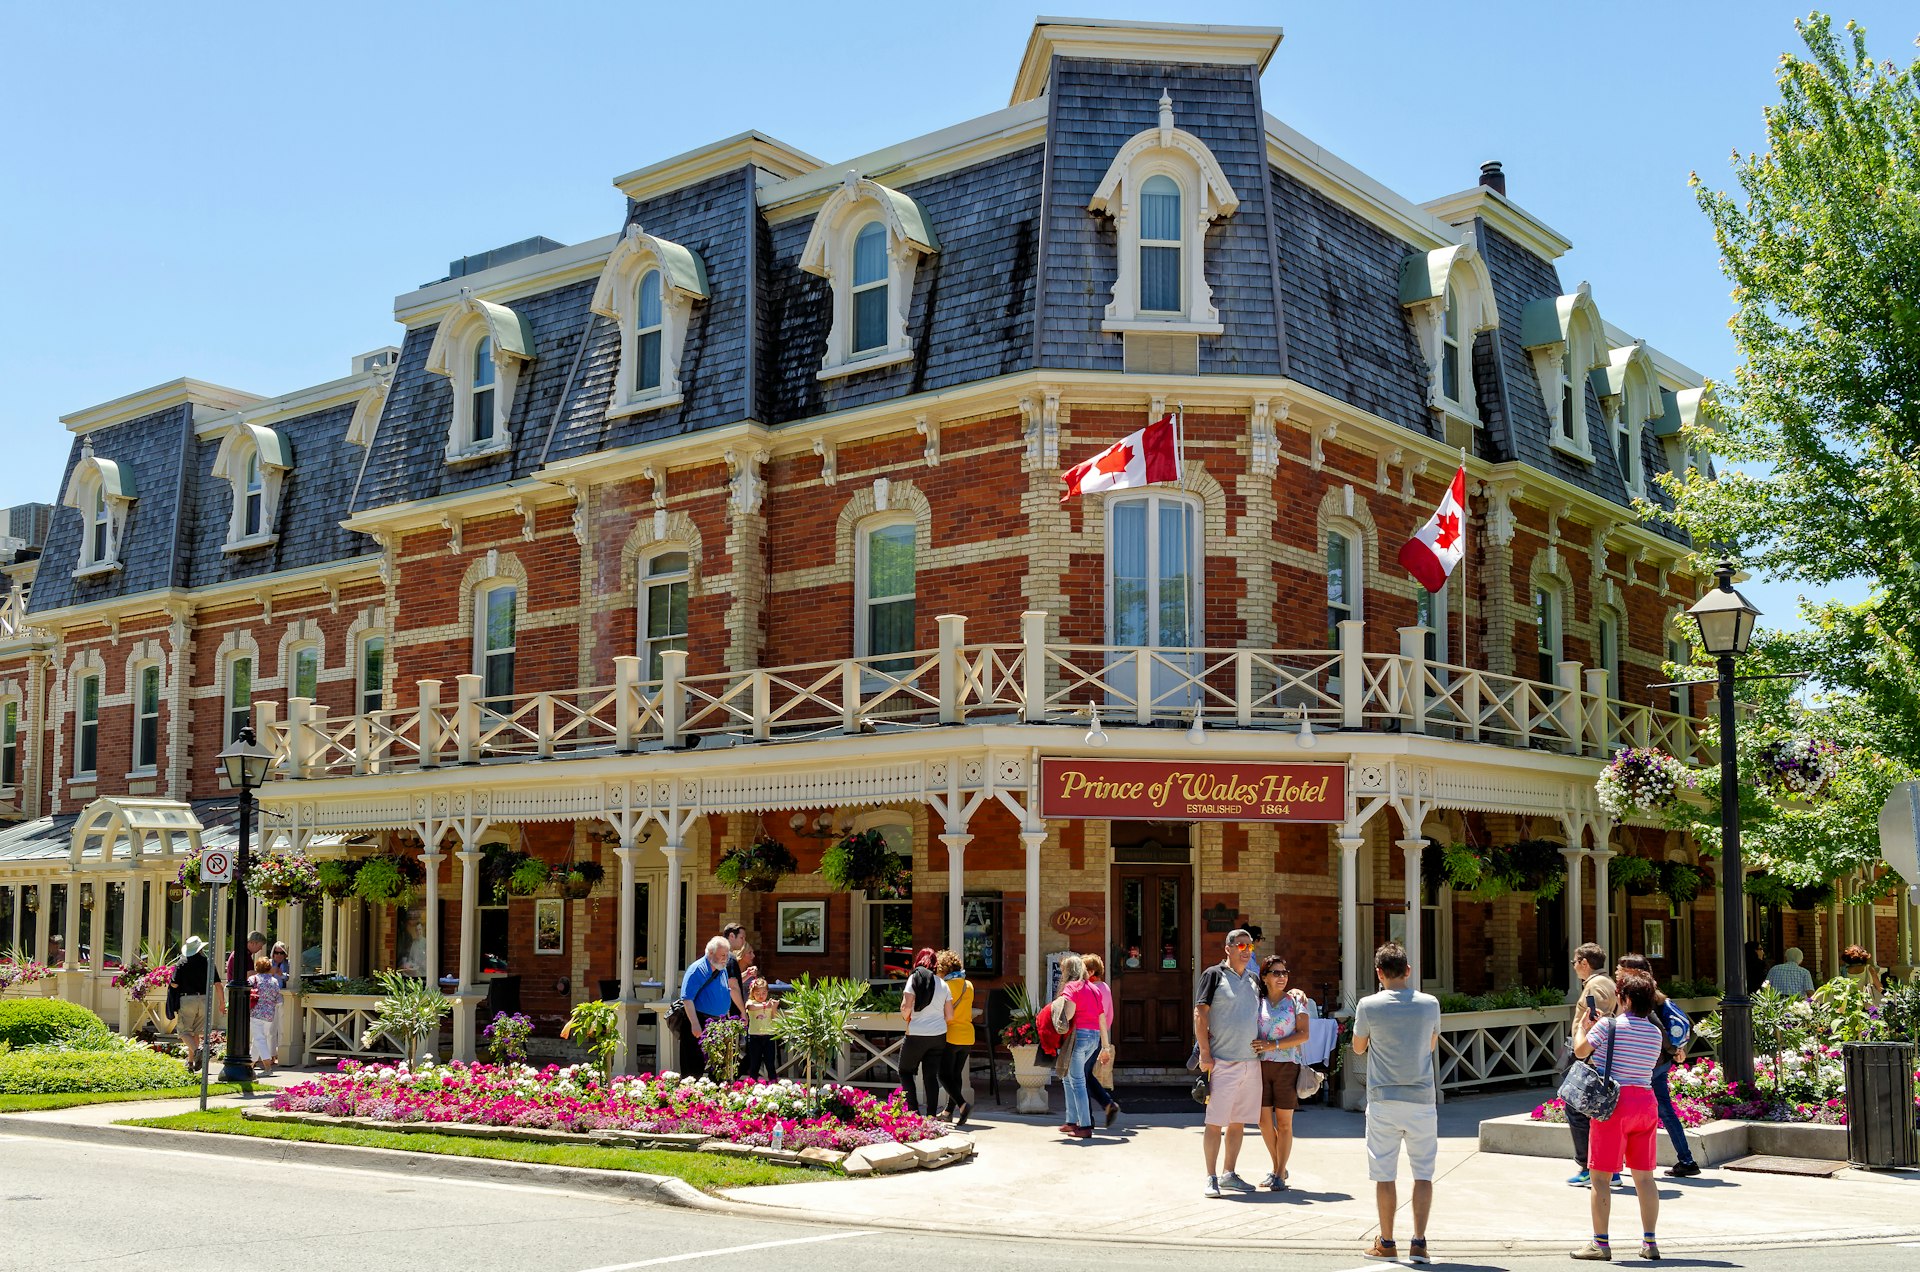 People take pictures in front of the historic, red-brick Prince of Wales Hotel, Niagara-on-the-Lake, Ontario, Canda